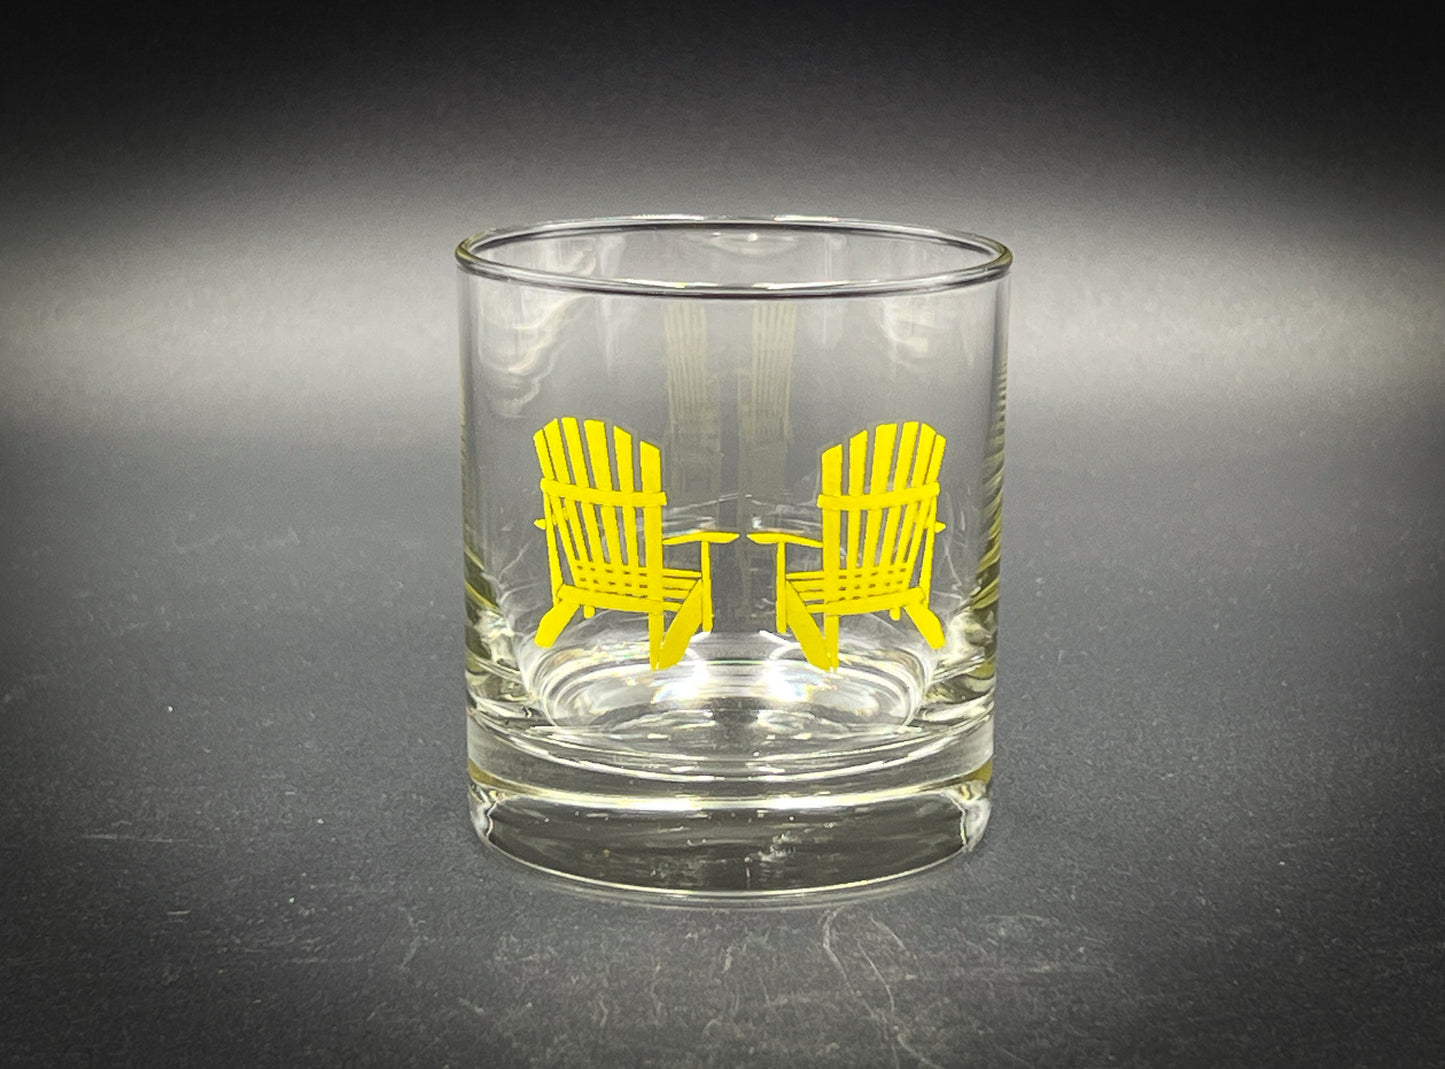 Adirondack Chairs Engraved and Painted - 10.25 oz Rocks Glass